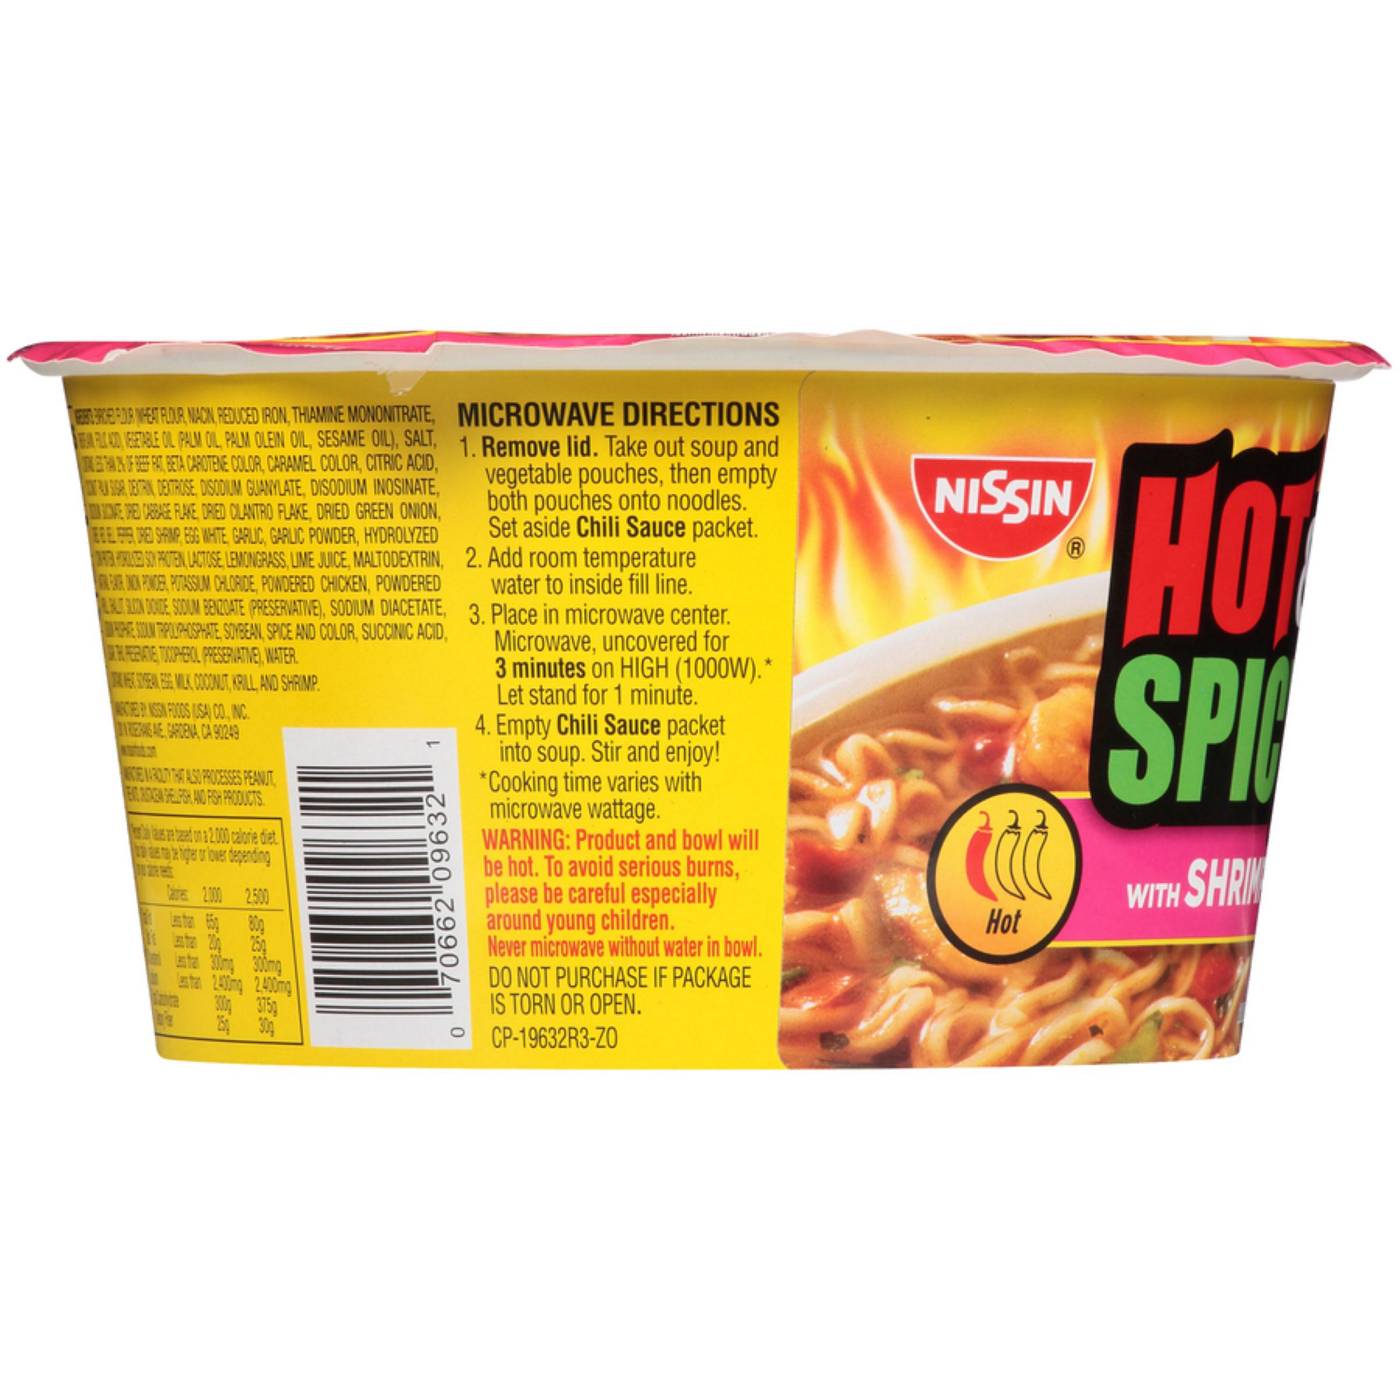 Nissin Hot & Spicy with Shrimp Ramen Noodle Soup; image 4 of 6